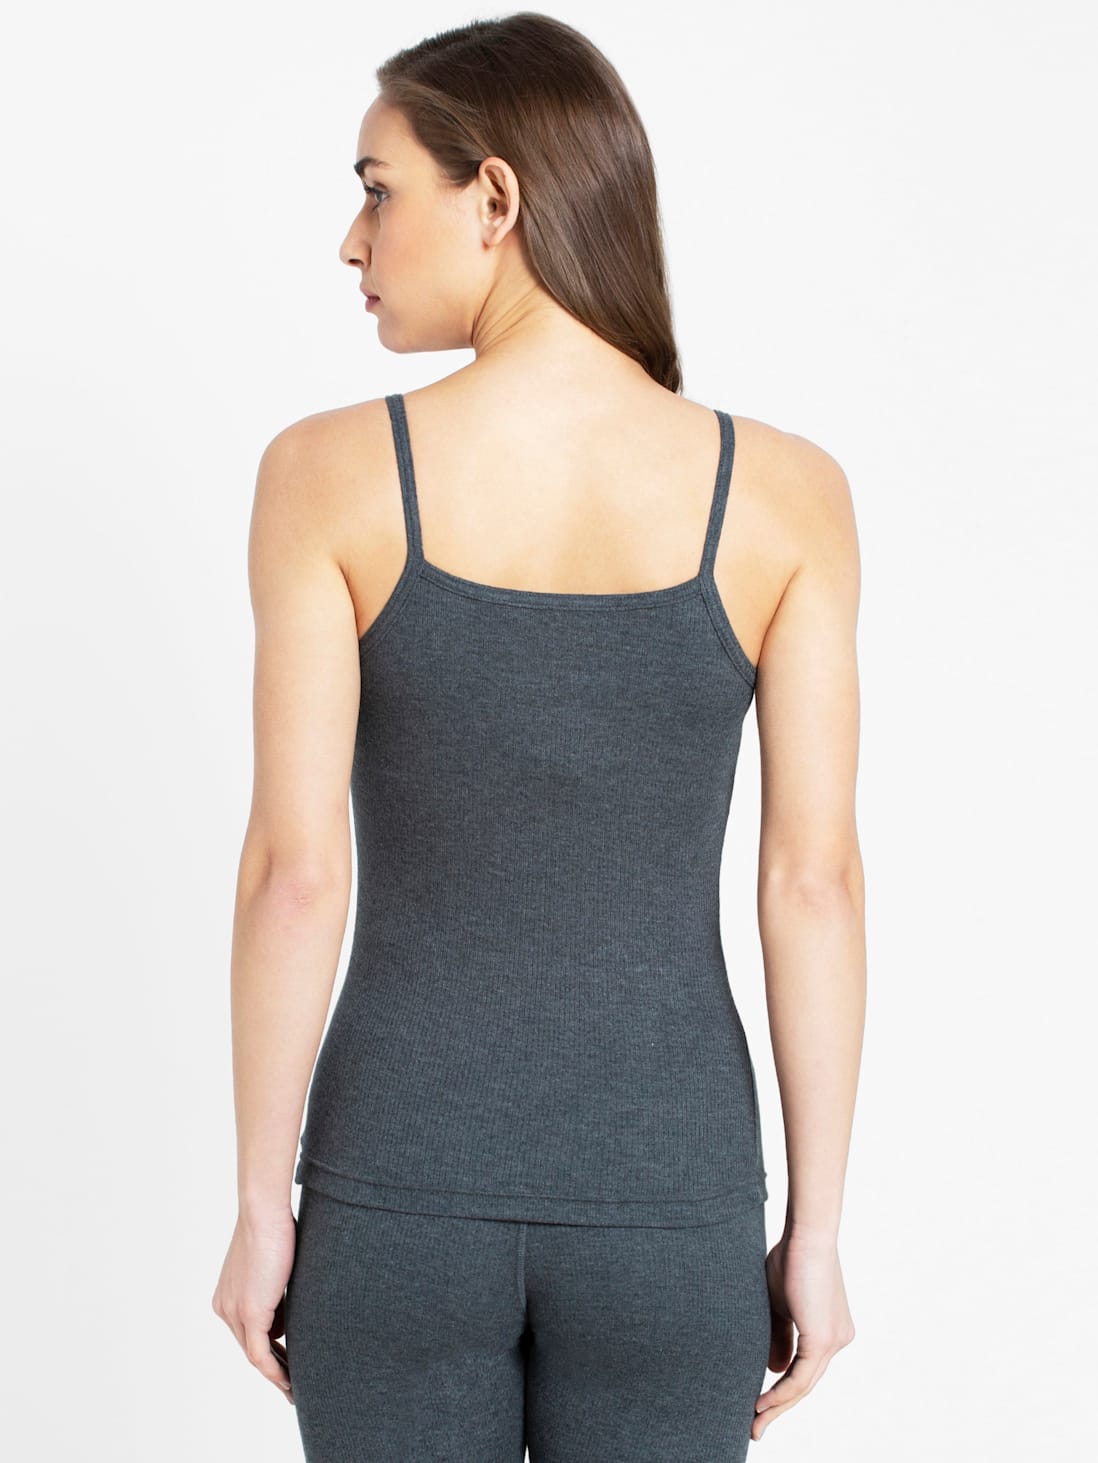 Jockey Polyester Camisoles for Women